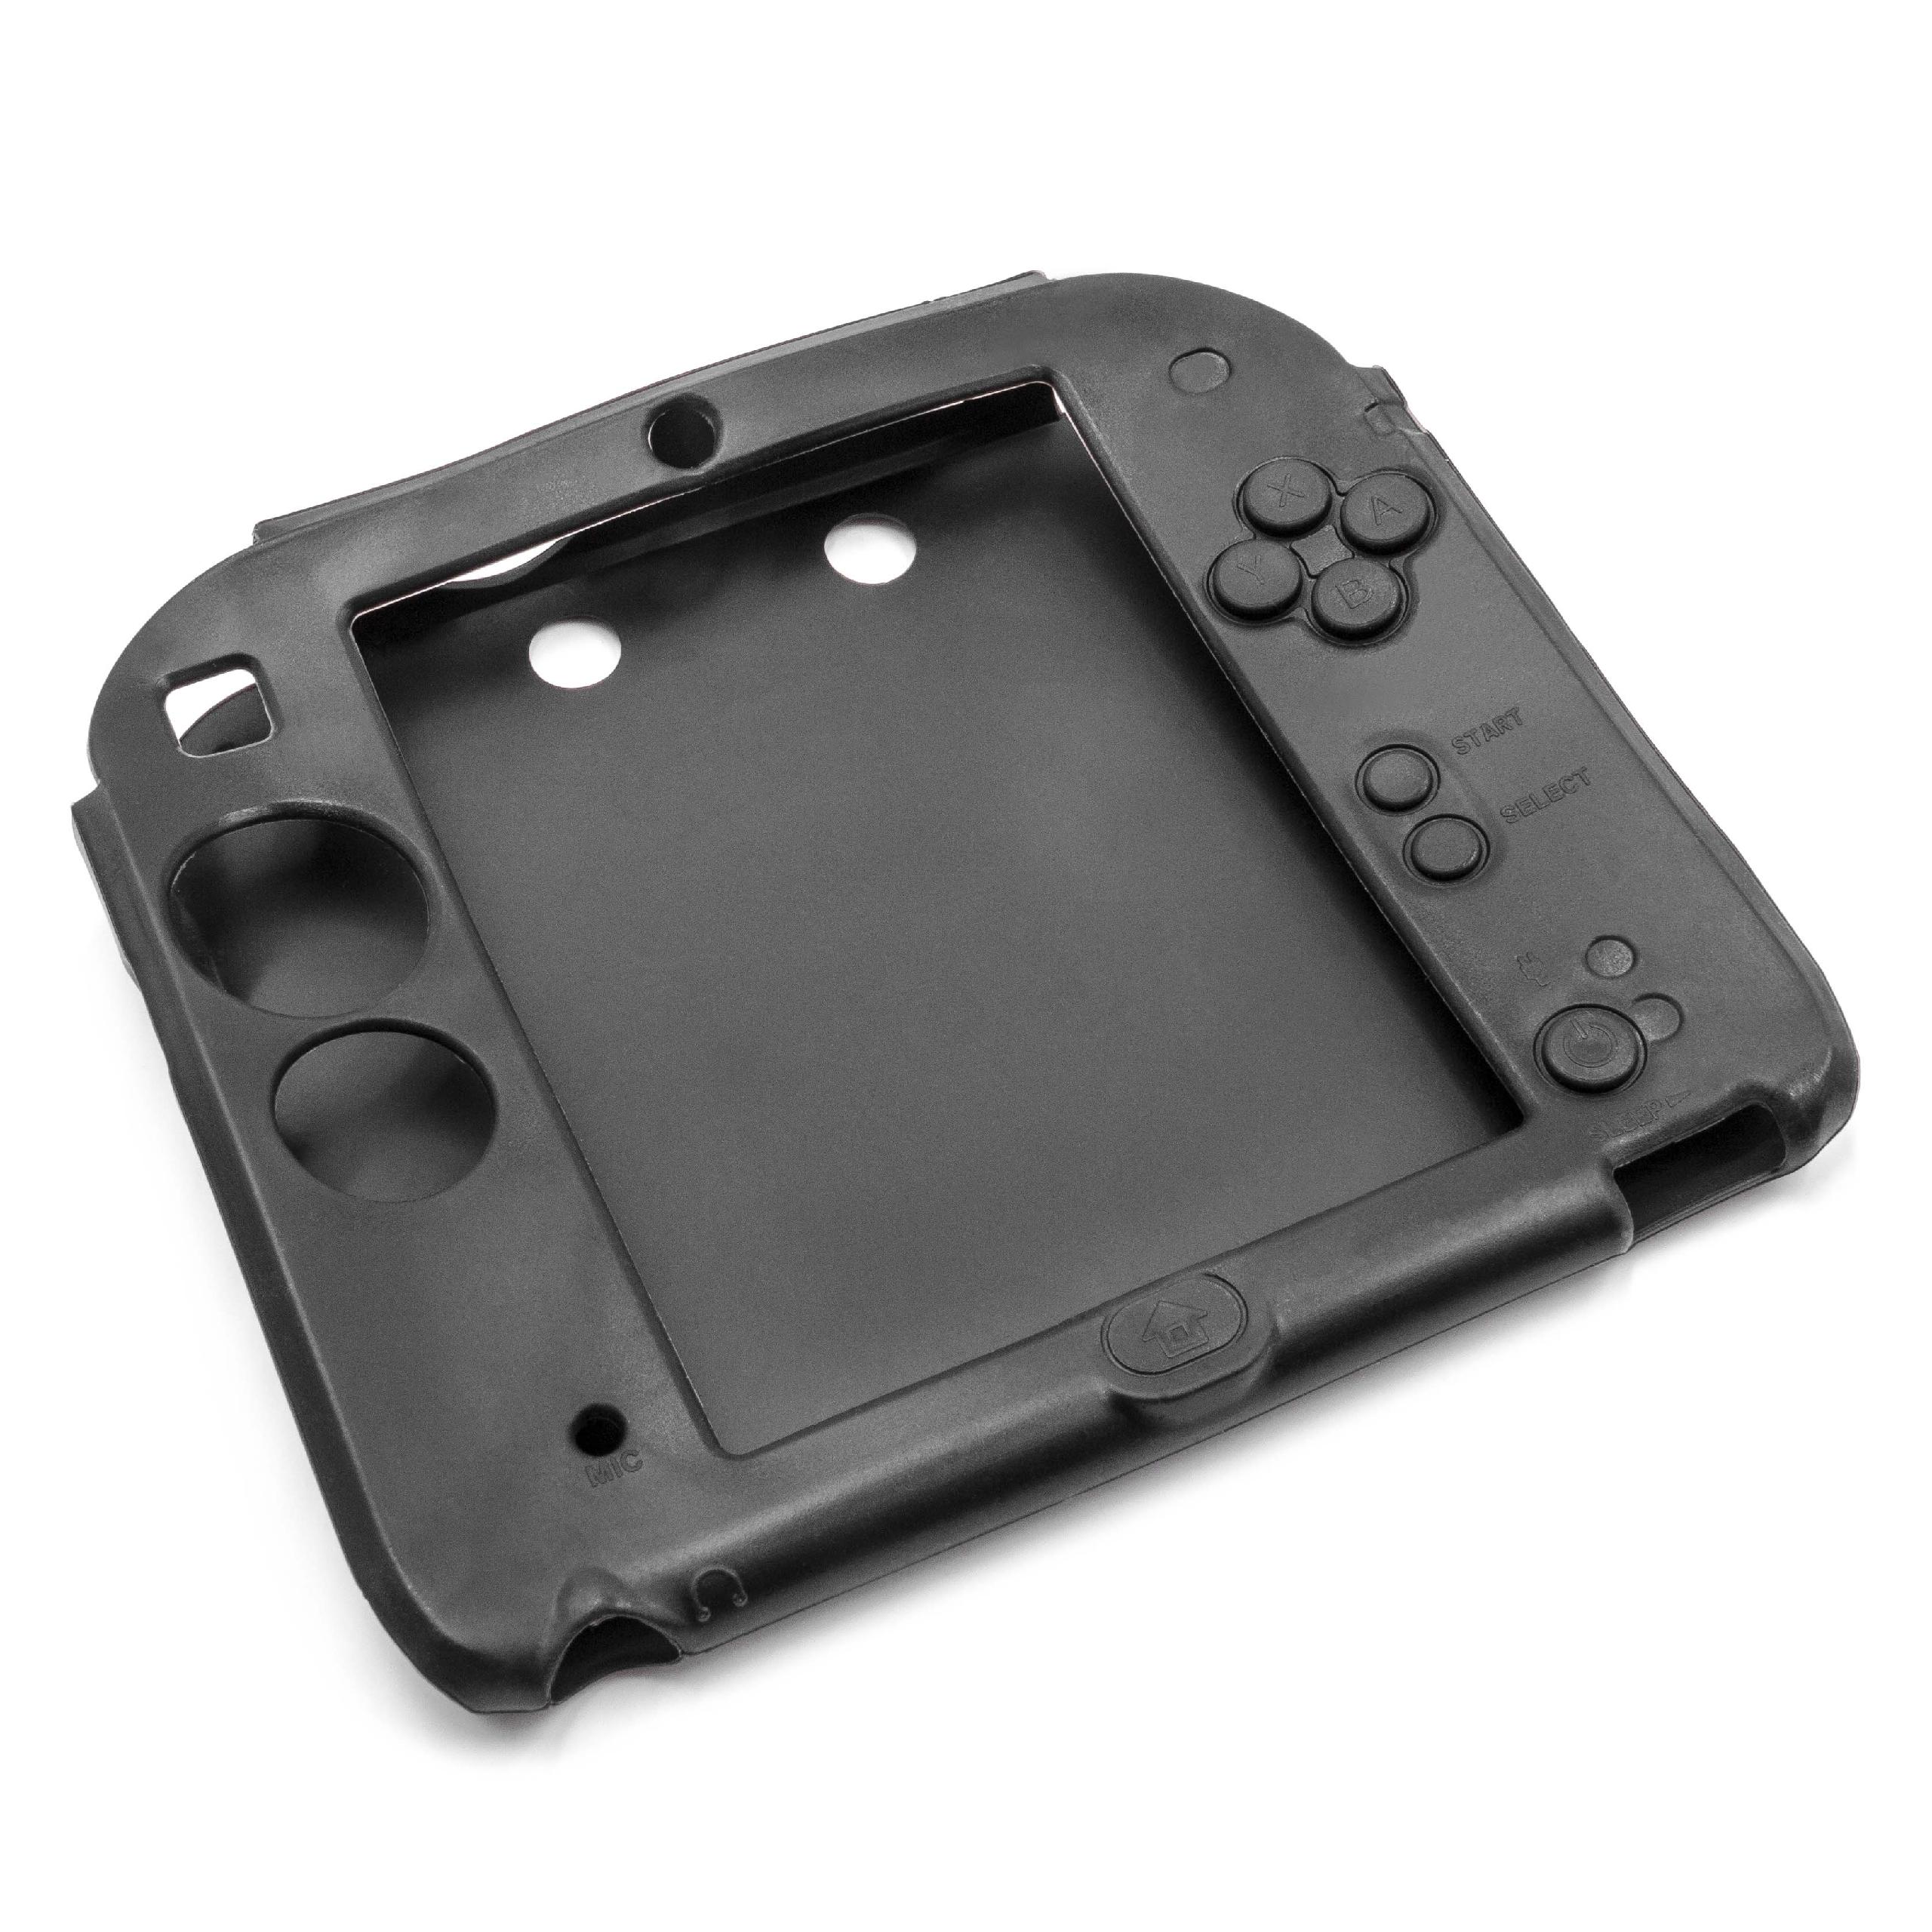 Cover suitable for Nintendo 2DS Gaming Console - Case, Silicone, Black